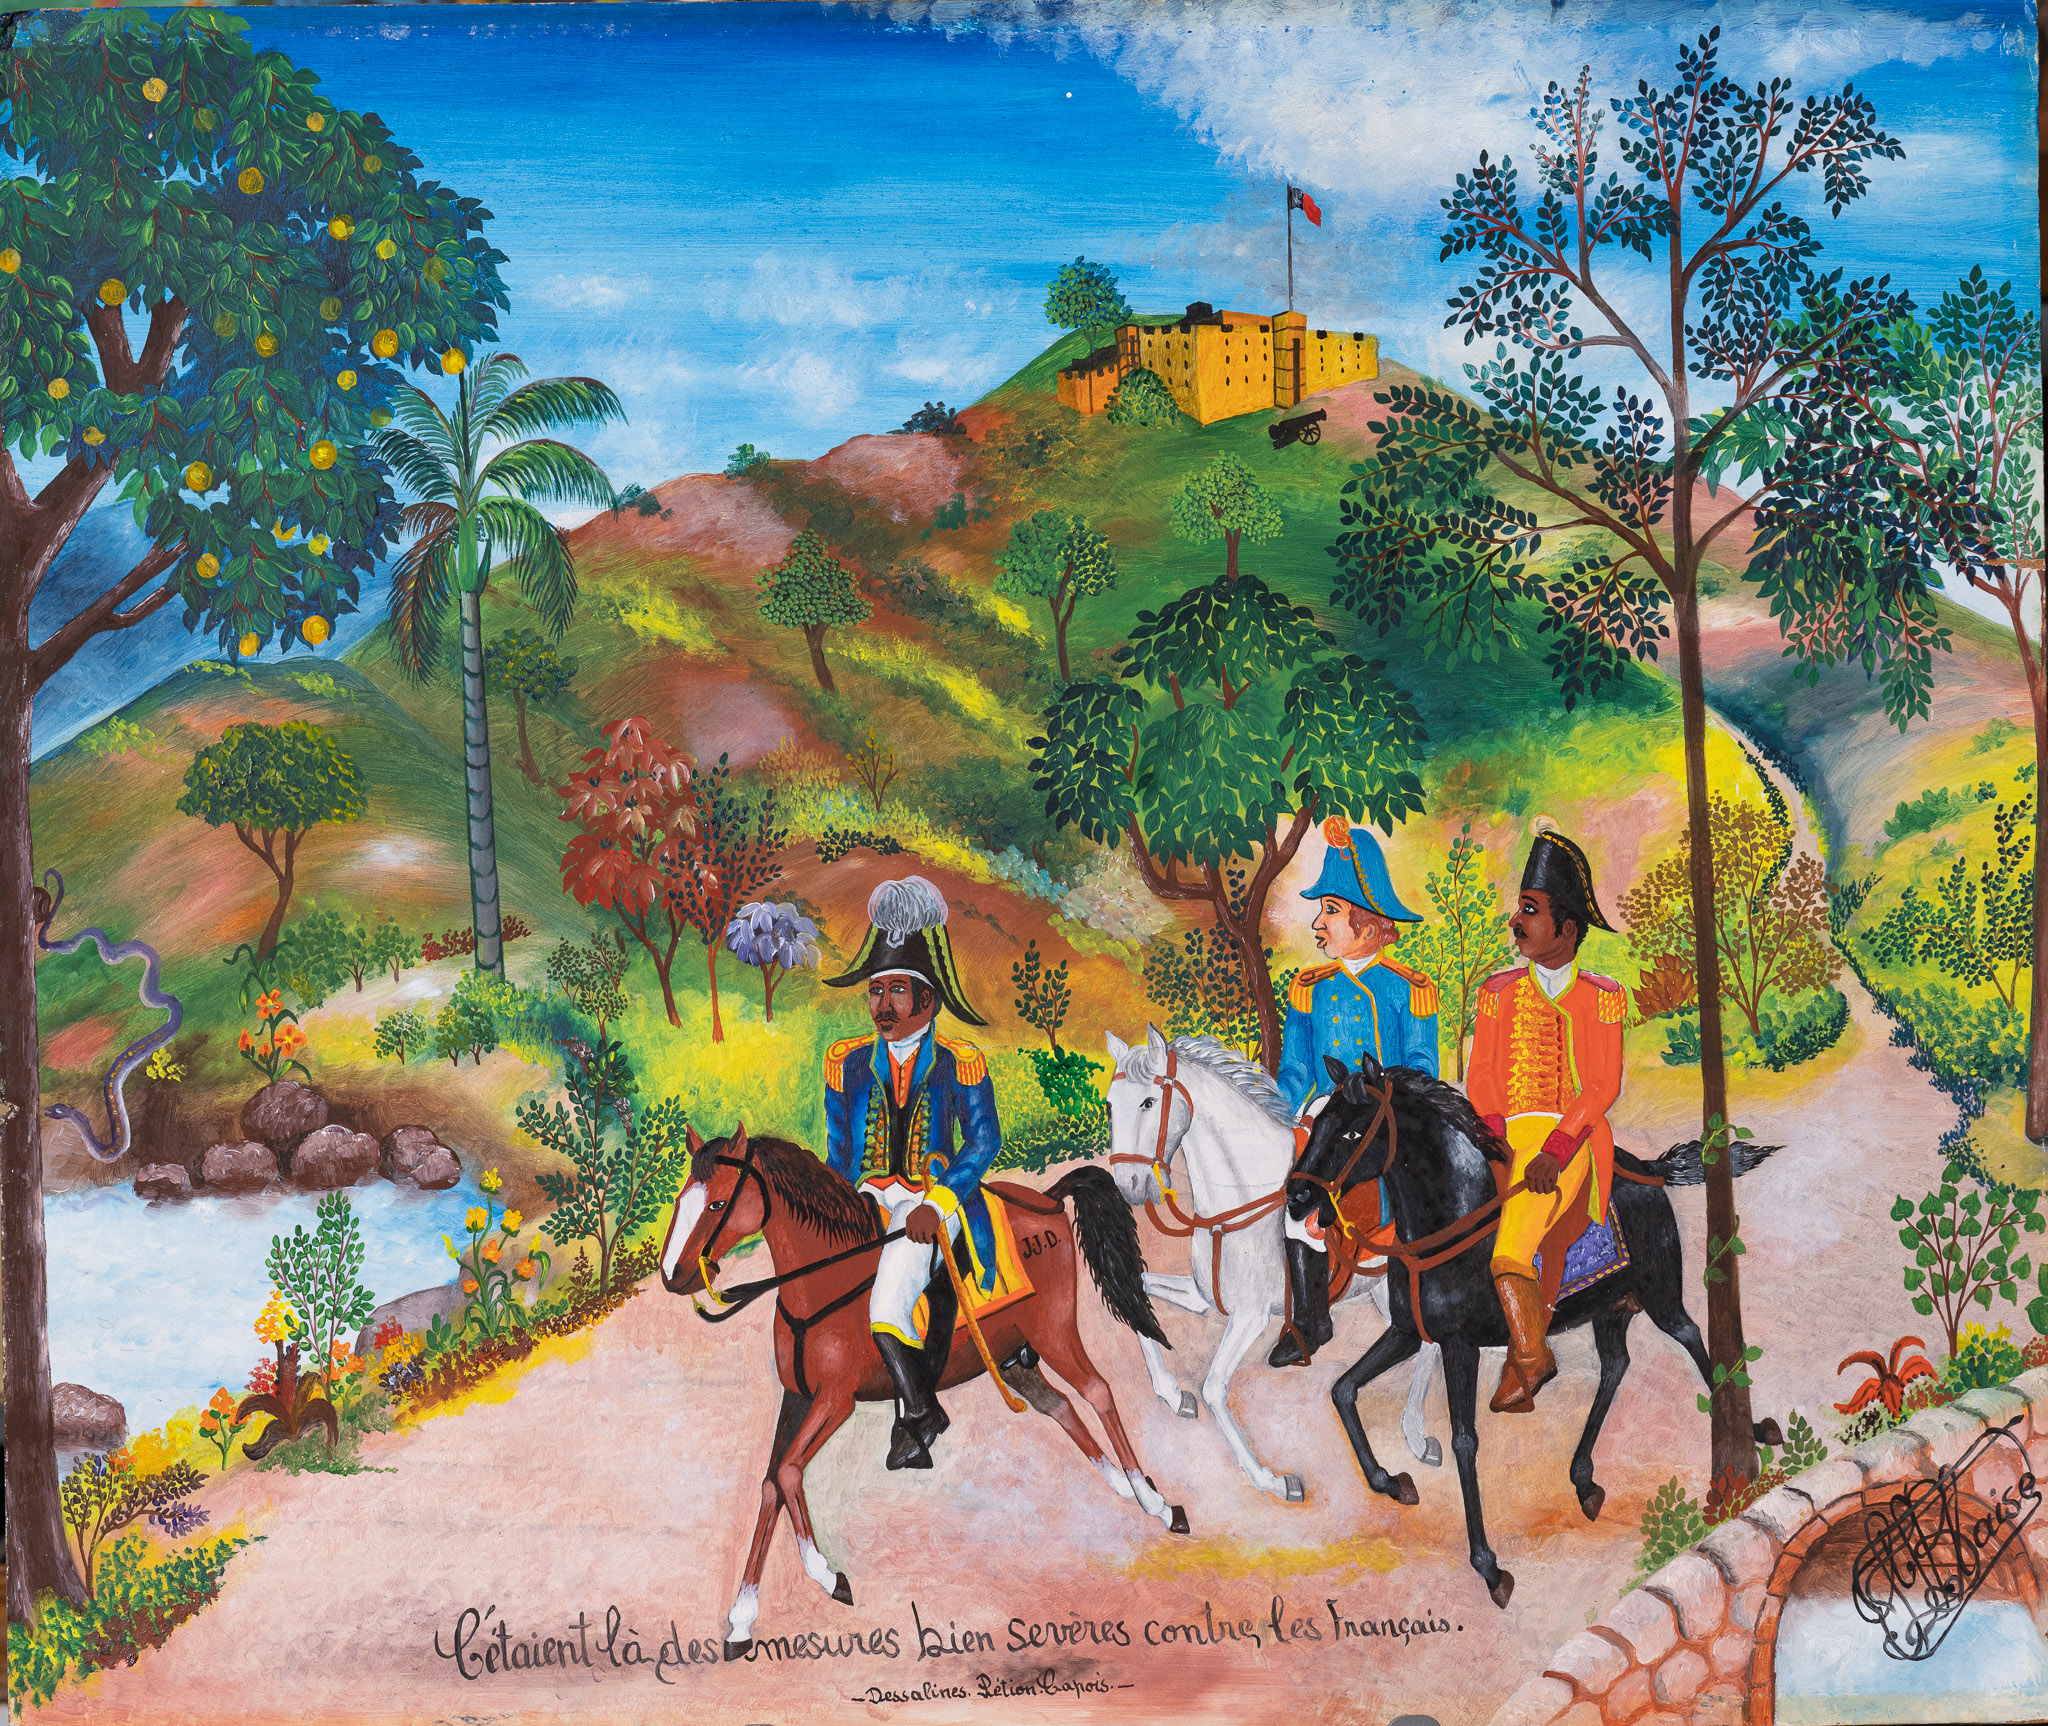 Dessalines, Petion and Capois, 1975